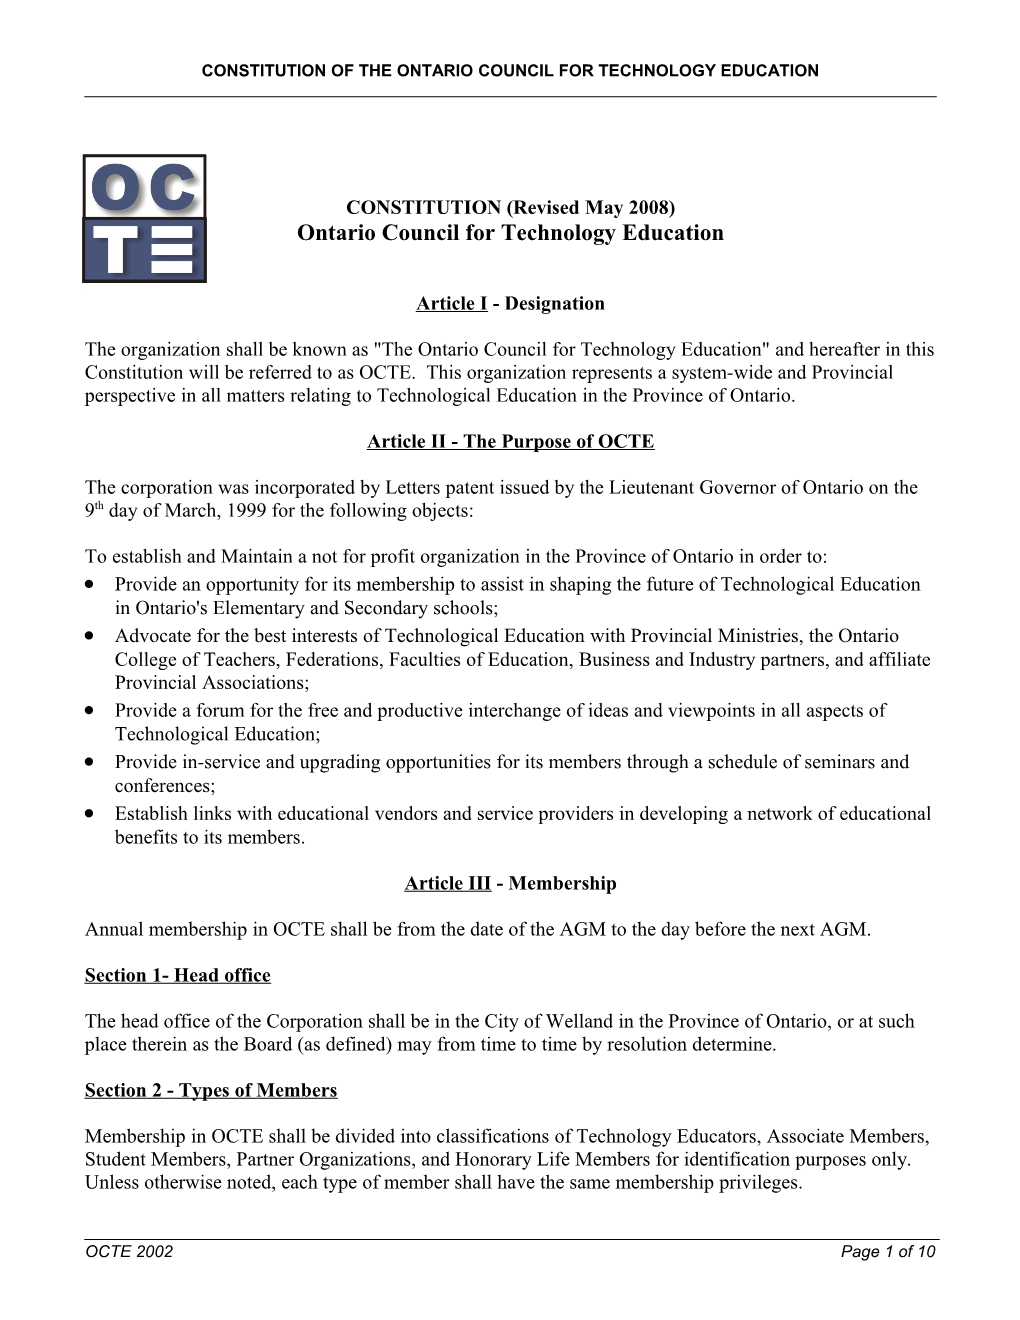 Constitution of the Ontario Council for Technology Education